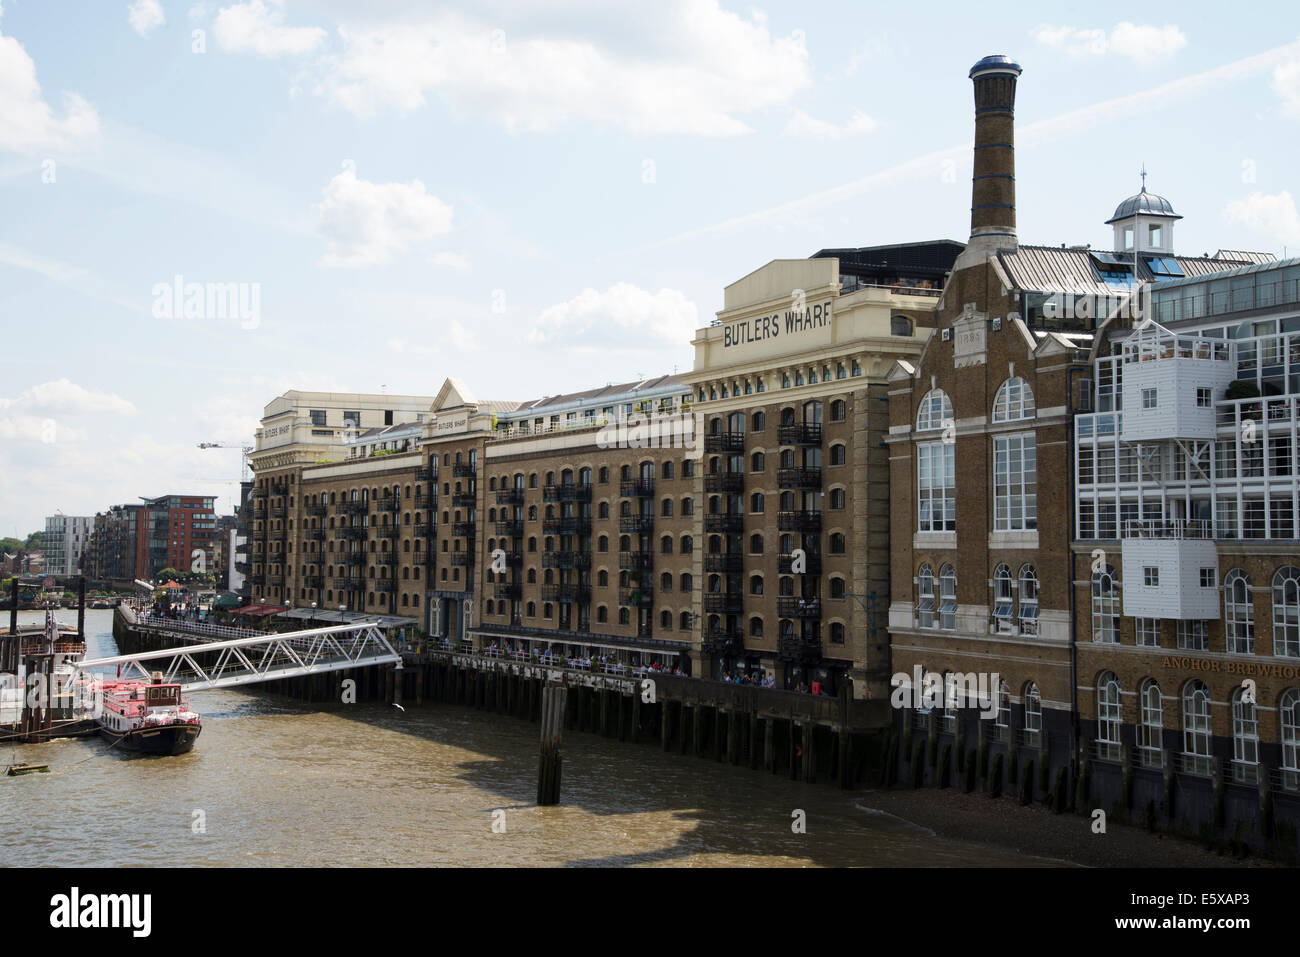 Butlers Wharf, Southwark, London, UK. River view from Tower Bridge Stock Photo